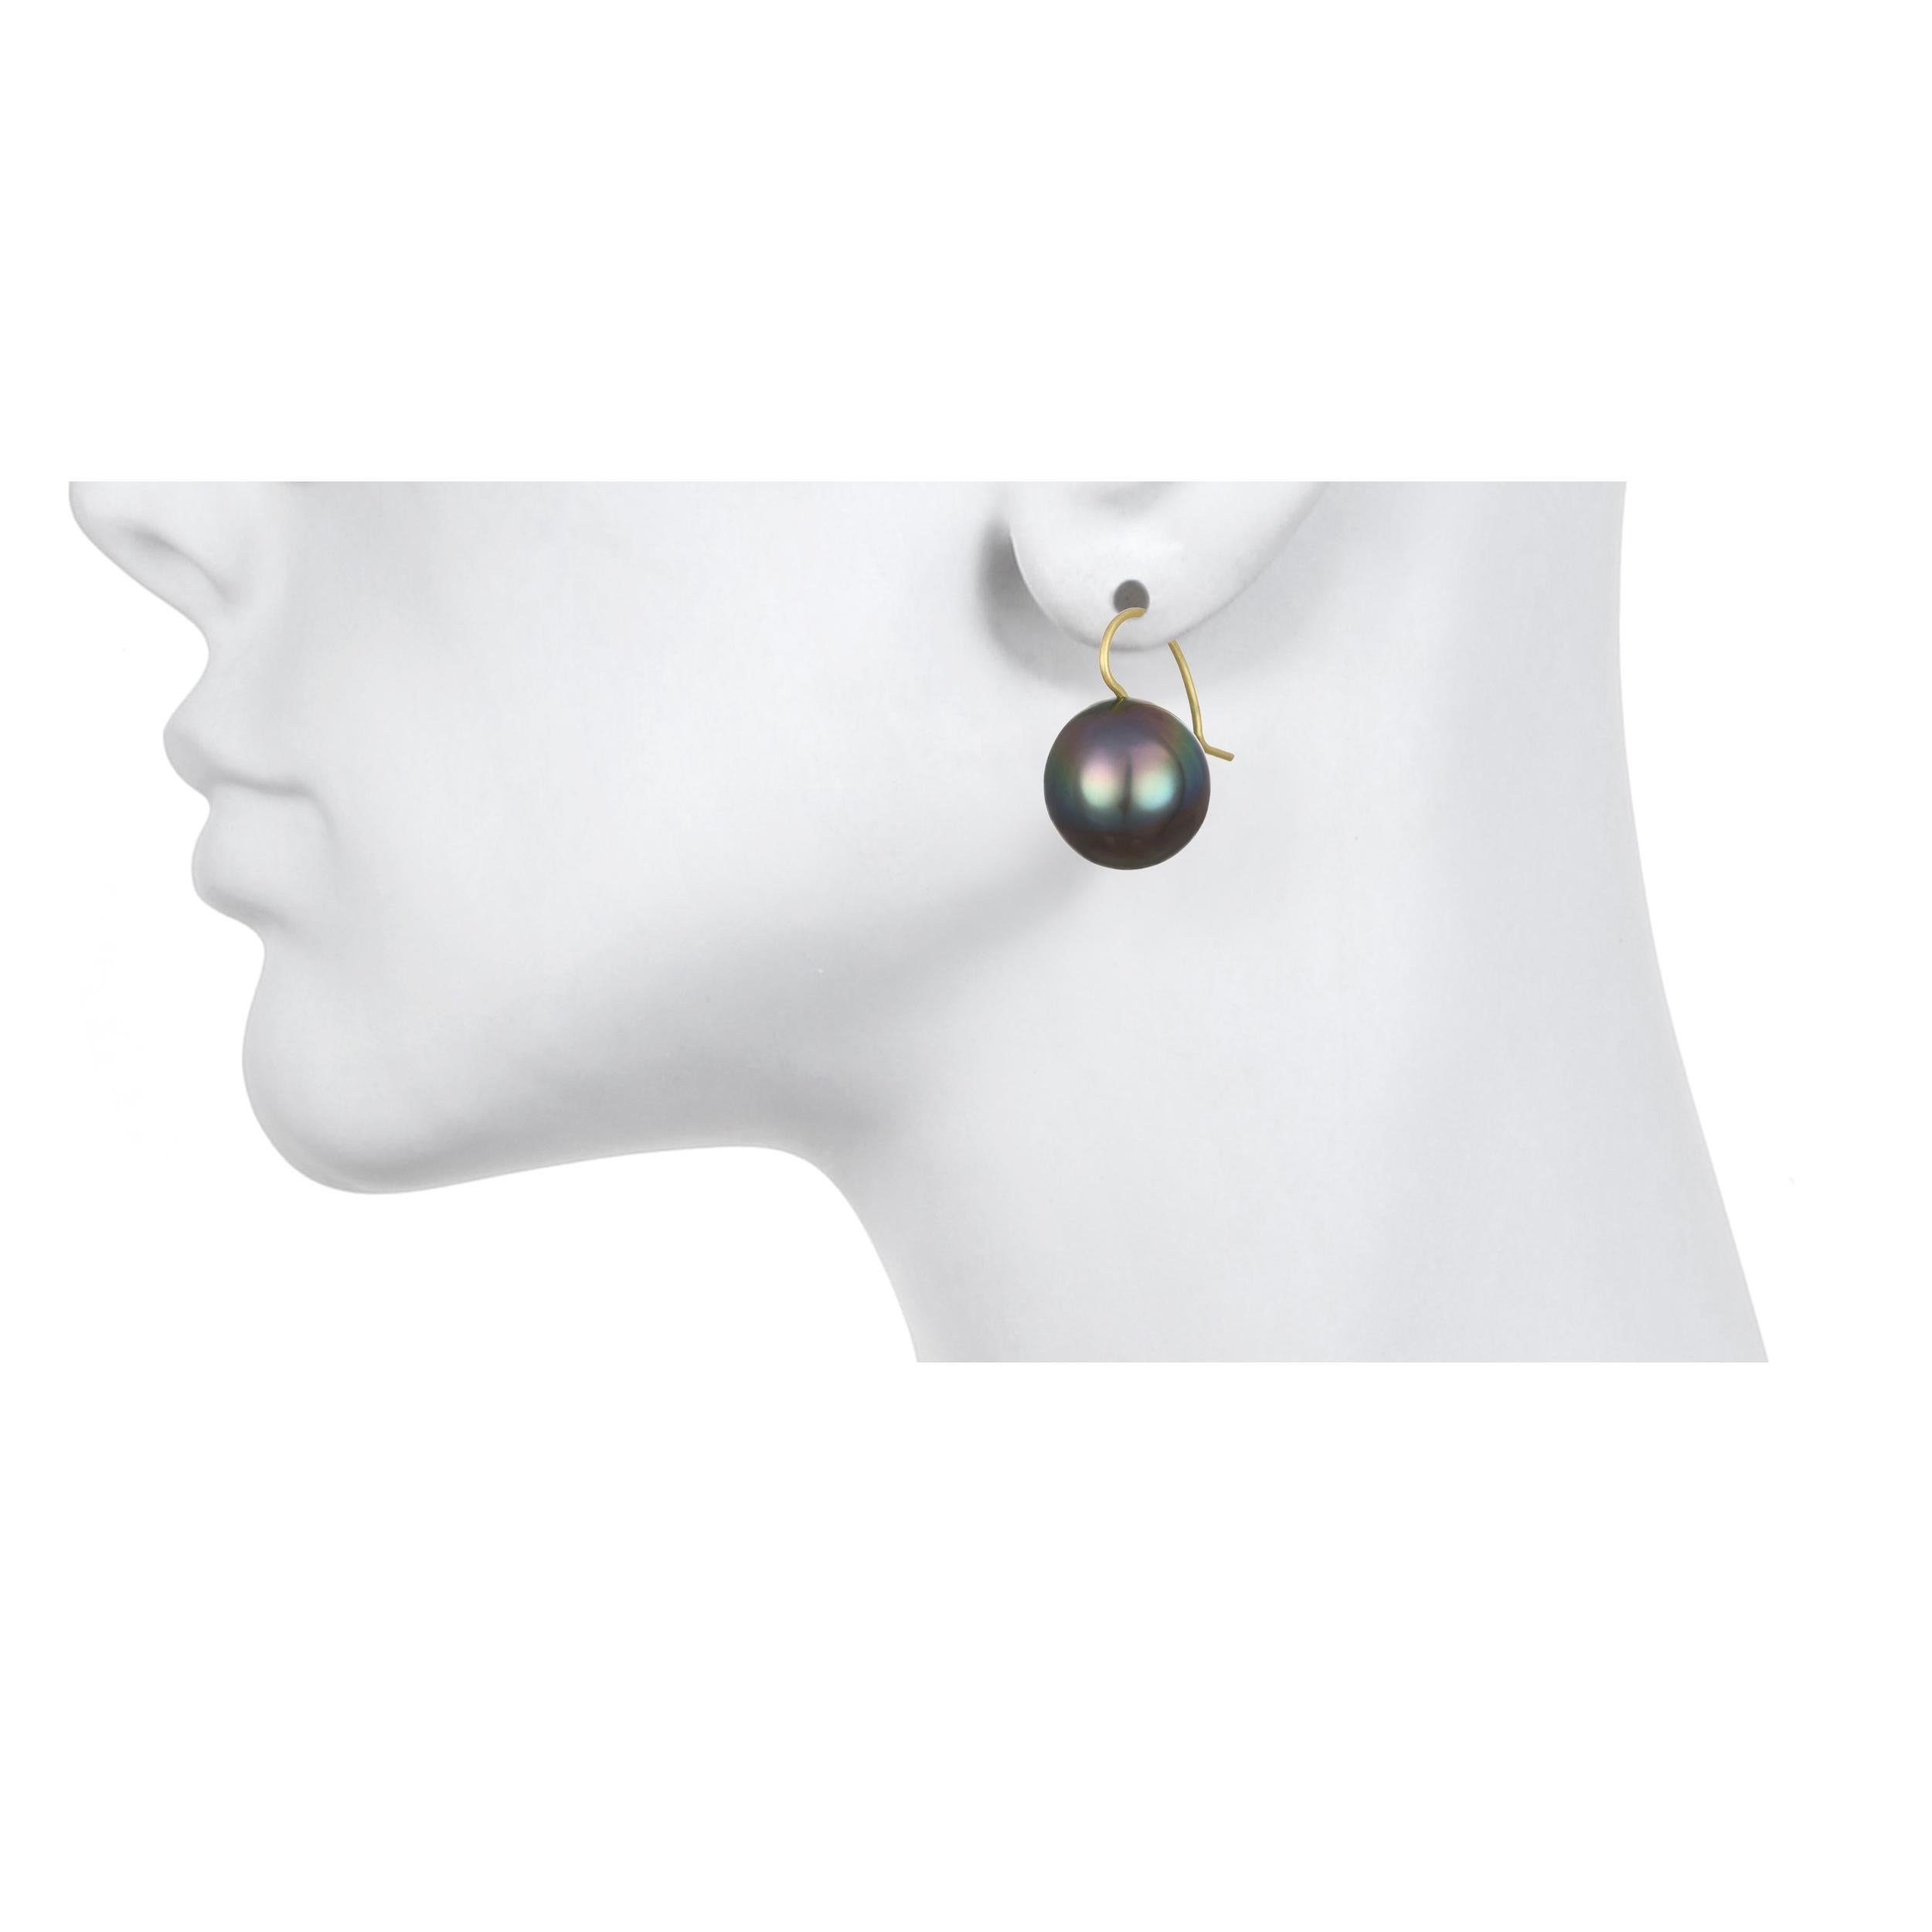 Faye Kim's pearl earrings are classic, timeless, and simply chic - the natural beauty of Baroque Black Tahitian cultured pearls are highlighted simply with 18k gold ear wires.  
Each pearl is unique and varies slightly in shape and color due to its